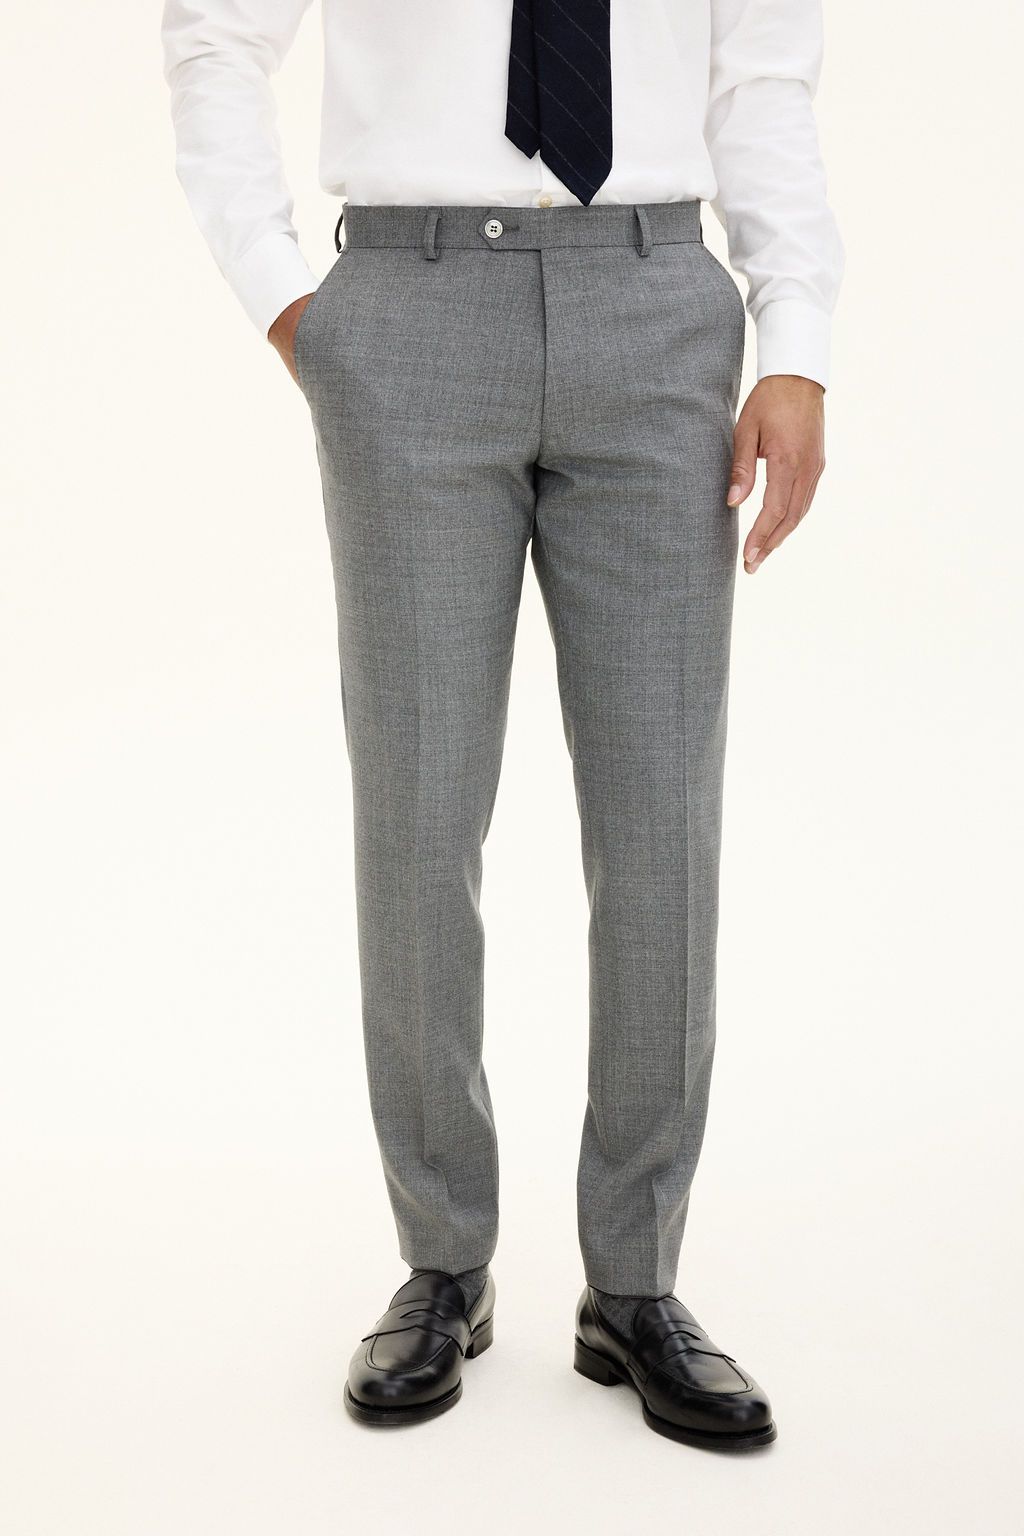 Scott by the Label | Navy Sharkskin Trousers | SuitDirect.co.uk